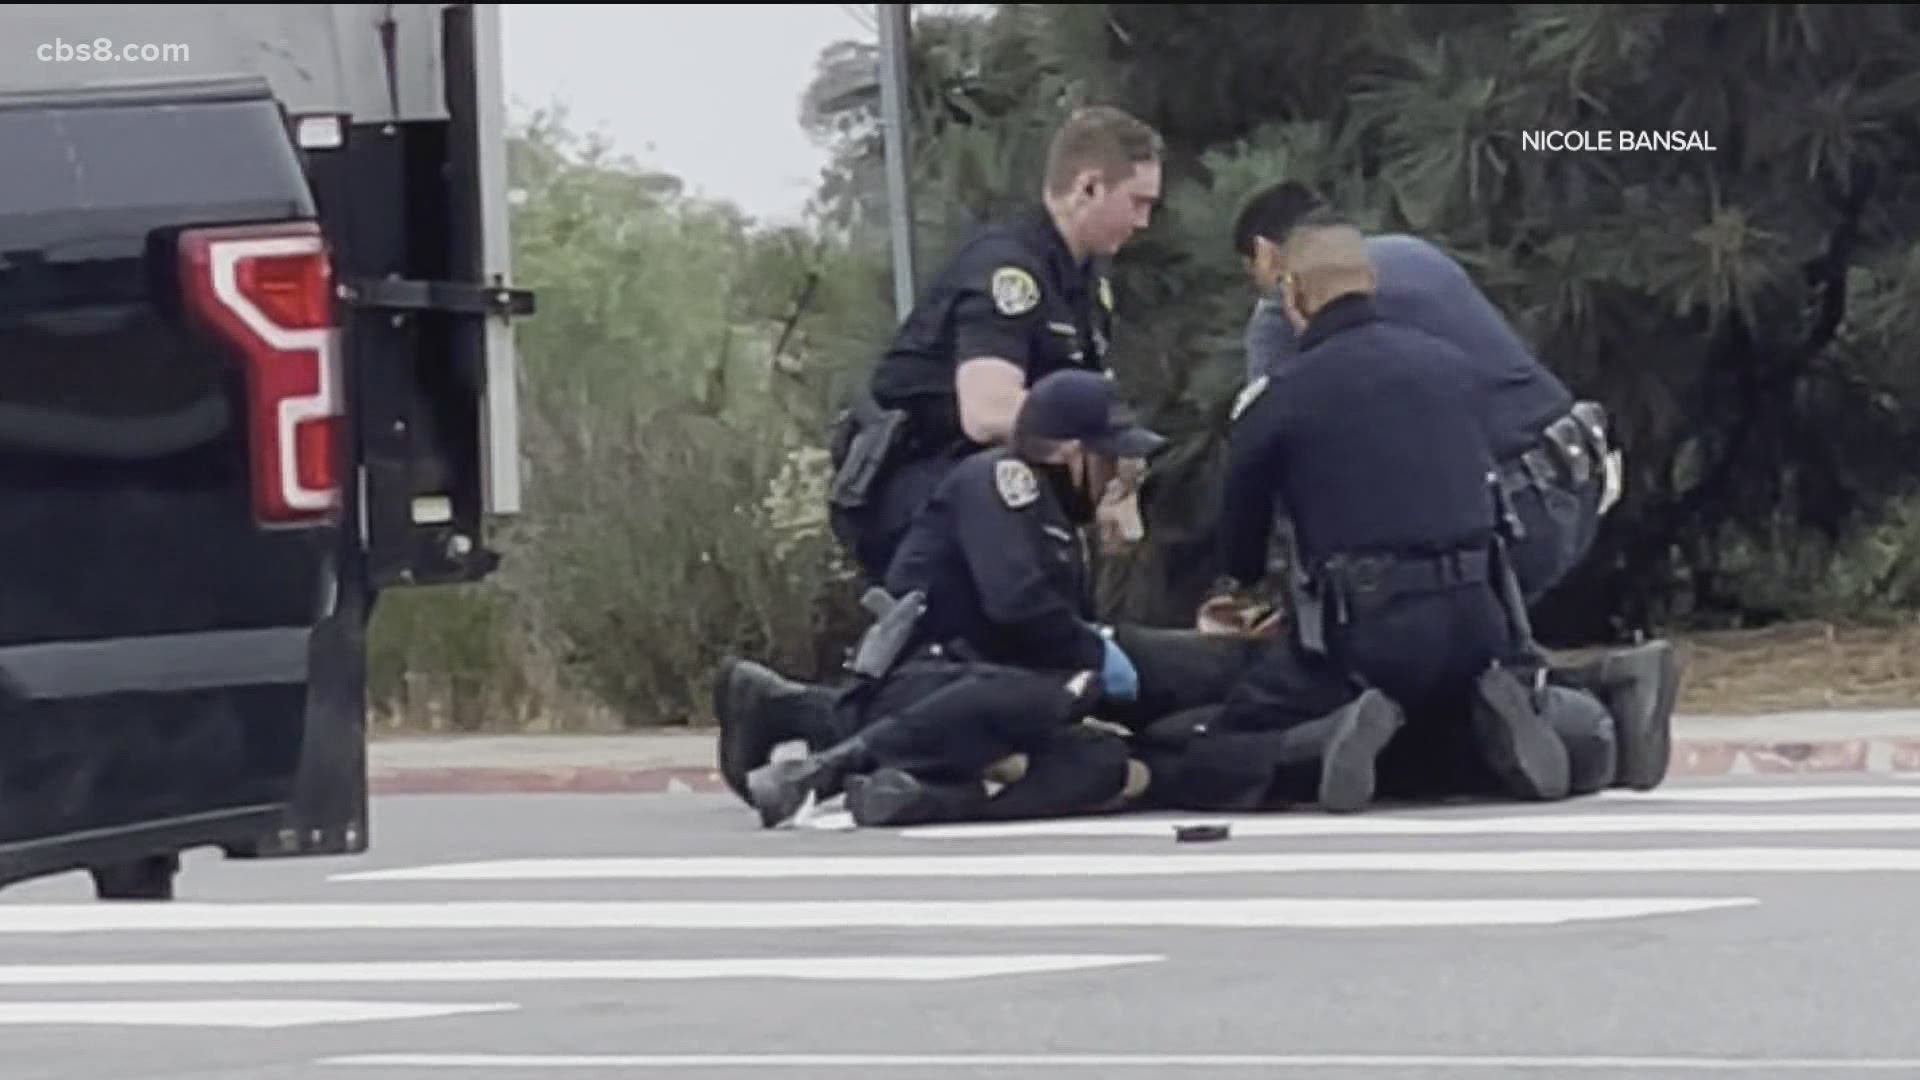 Video of the officers' efforts to detain the man, who is reportedly experiencing homelessness, prompted a call for accountability from the local branch of the NAACP.